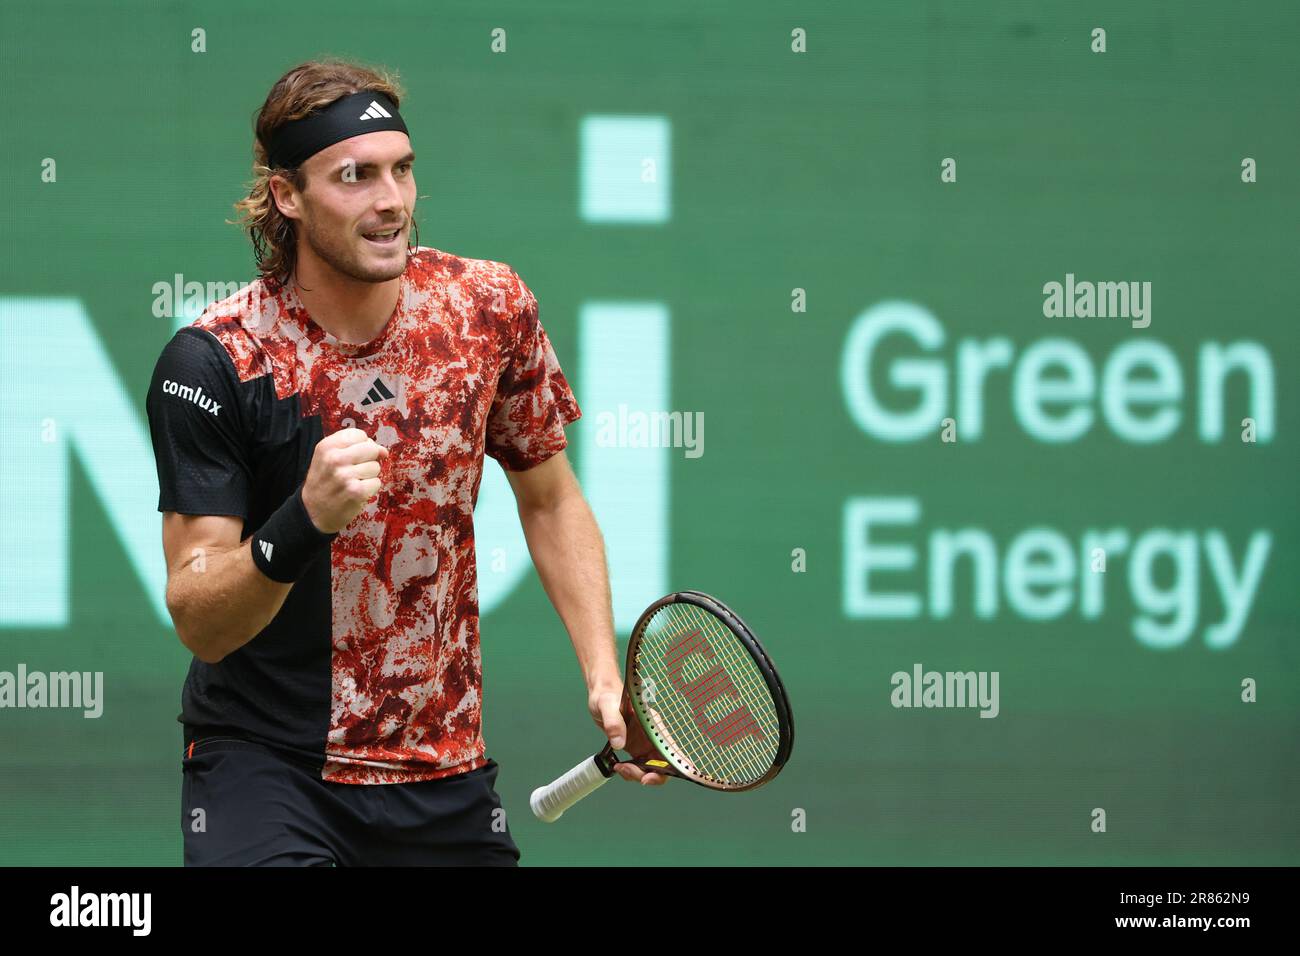 Halle, Germany. 19th June, 2023. Tennis: ATP Tour Singles, Men, 1st round,  Barrere (France) - Tsitsipas (Greece). Stefanos Tsitsipas clenches his  fist. Credit: Friso Gentsch/dpa/Alamy Live News Stock Photo - Alamy